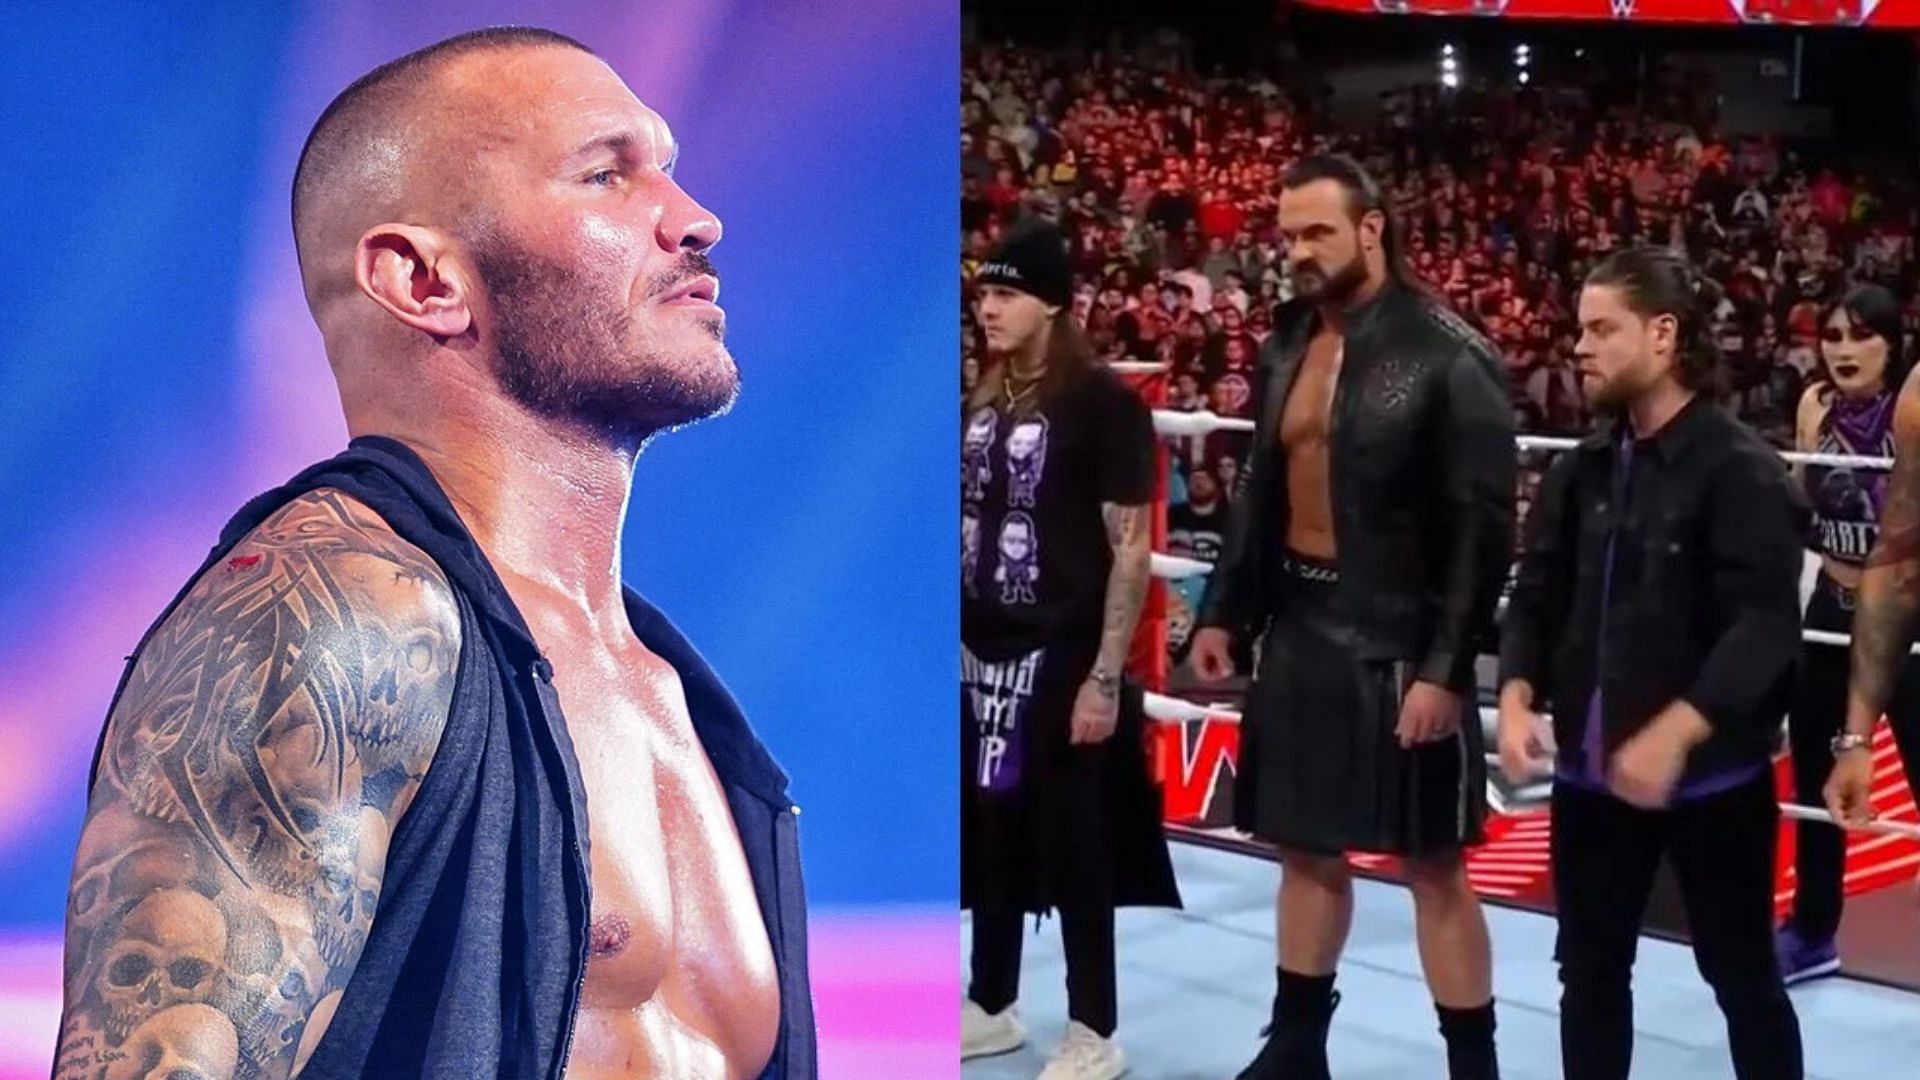 Drew McIntyre will cross paths with Randy Orton at WarGames